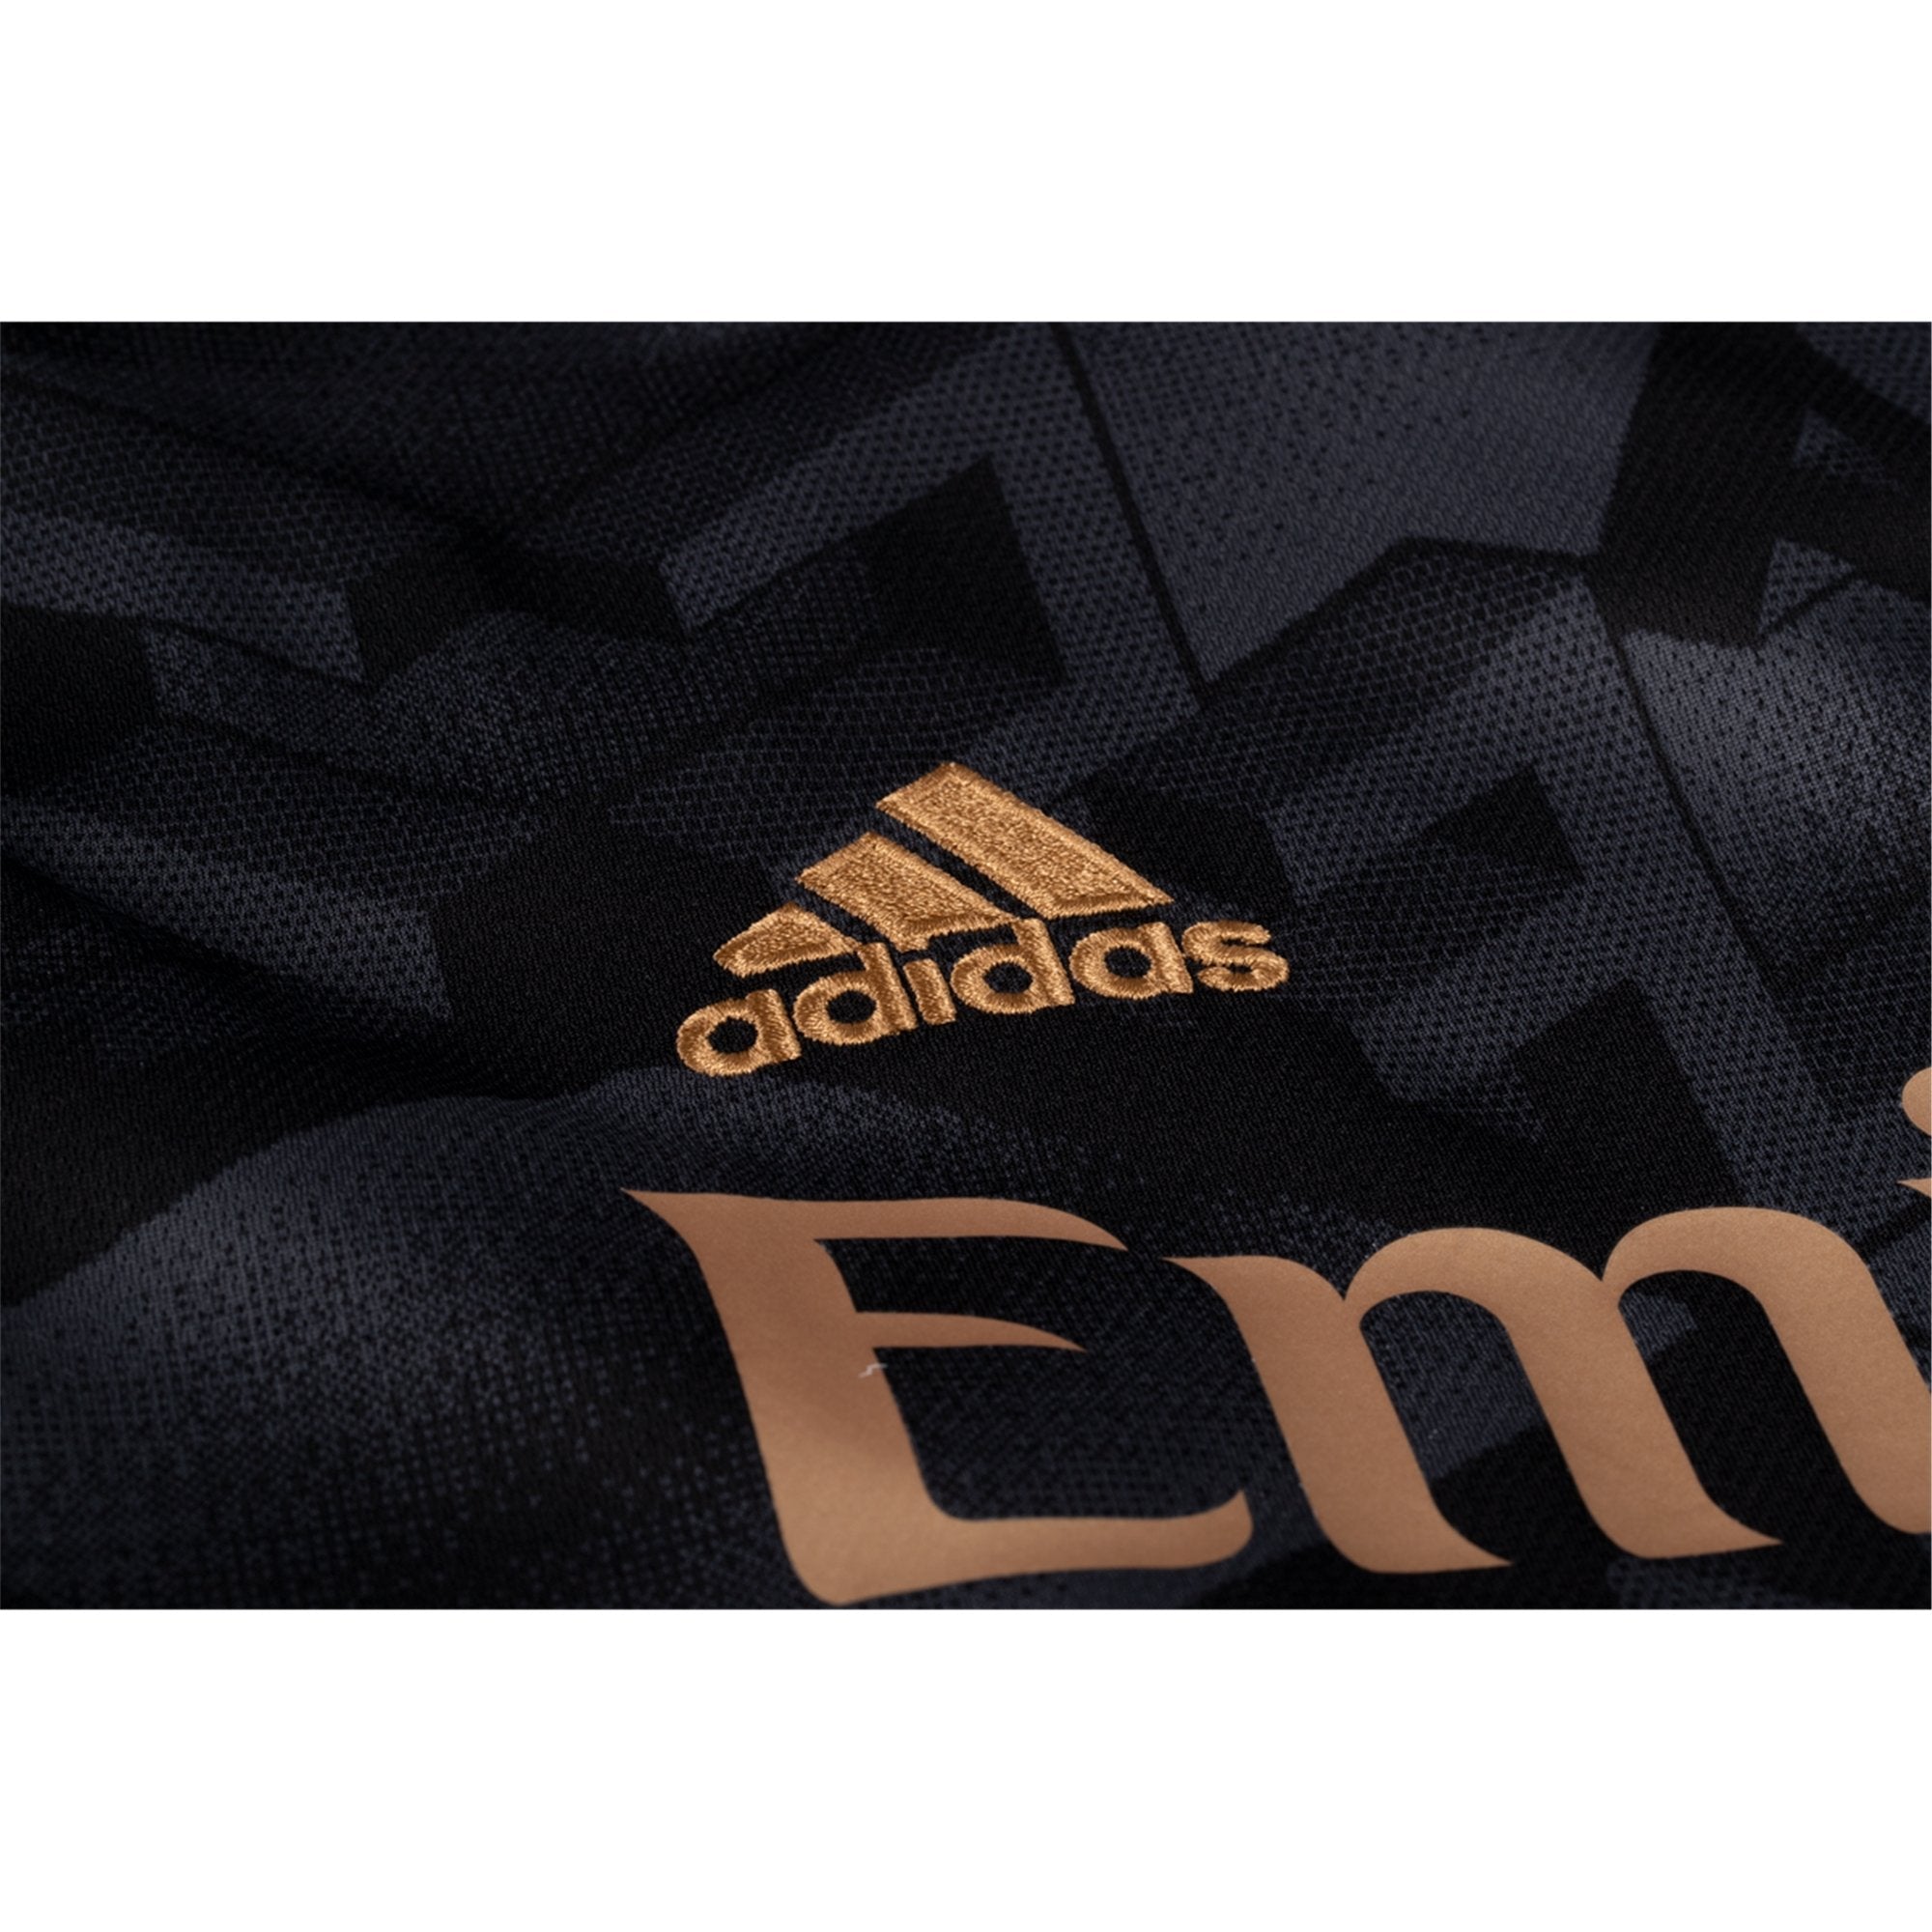 adidas Arsenal Away Jersey Adult 2022/23 H35902 black/gold – Soccer Zone